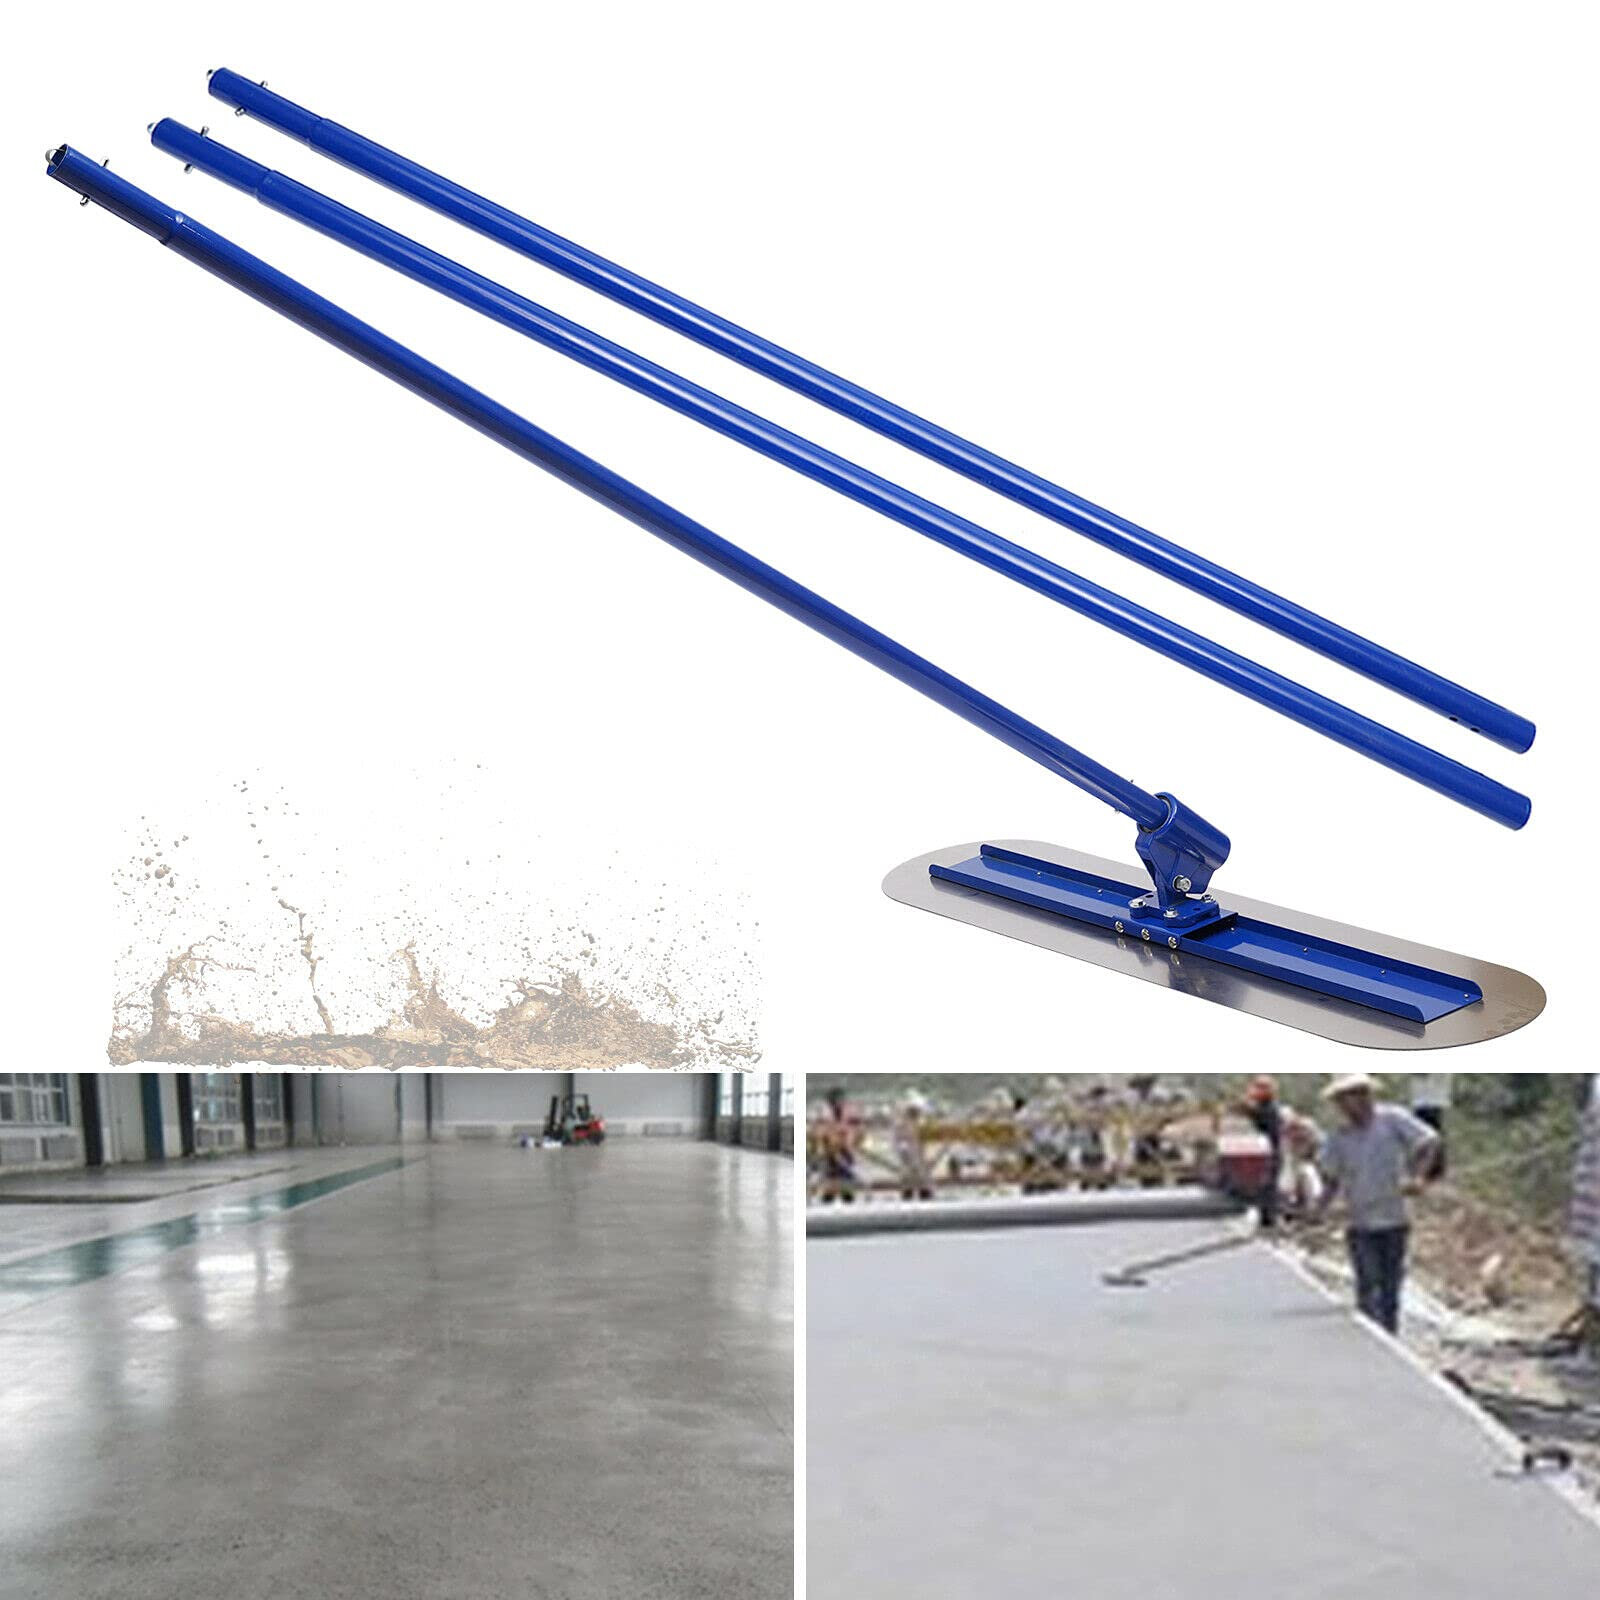 Trowels and finishing tools for creating smooth and durable concrete surfaces